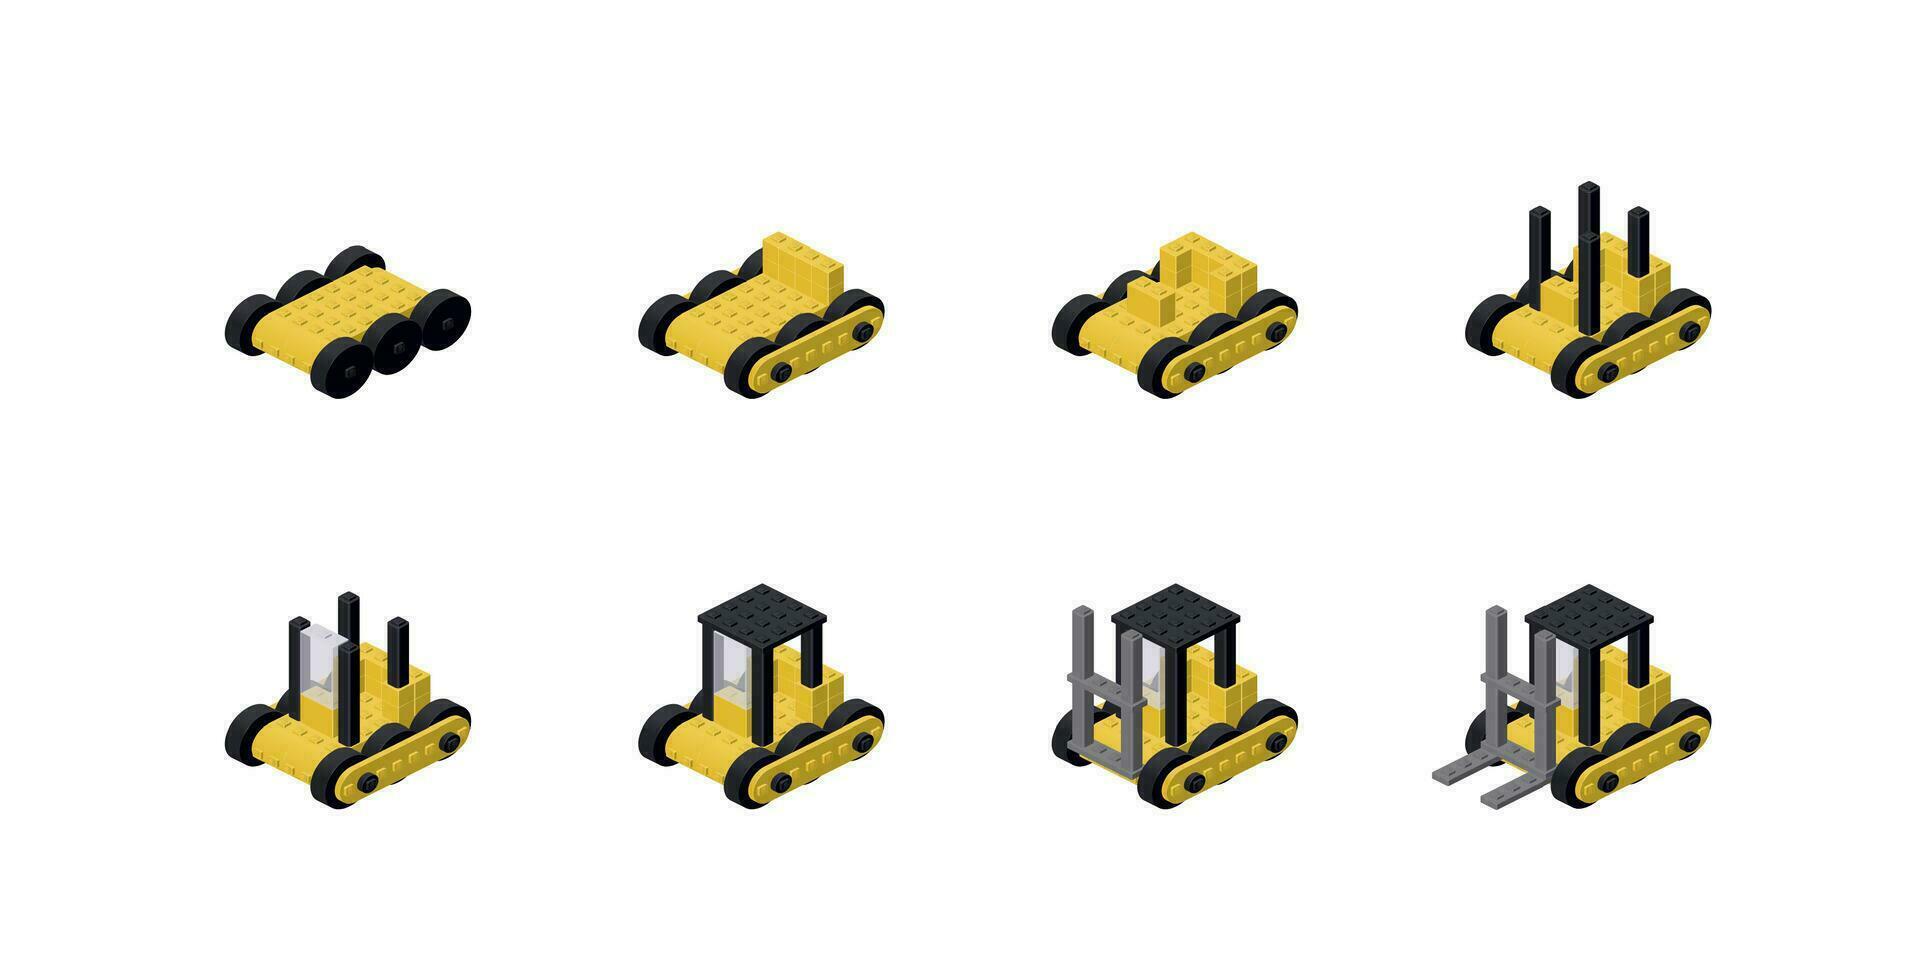 Step-by-step construction of a forklift from blocks. Vector